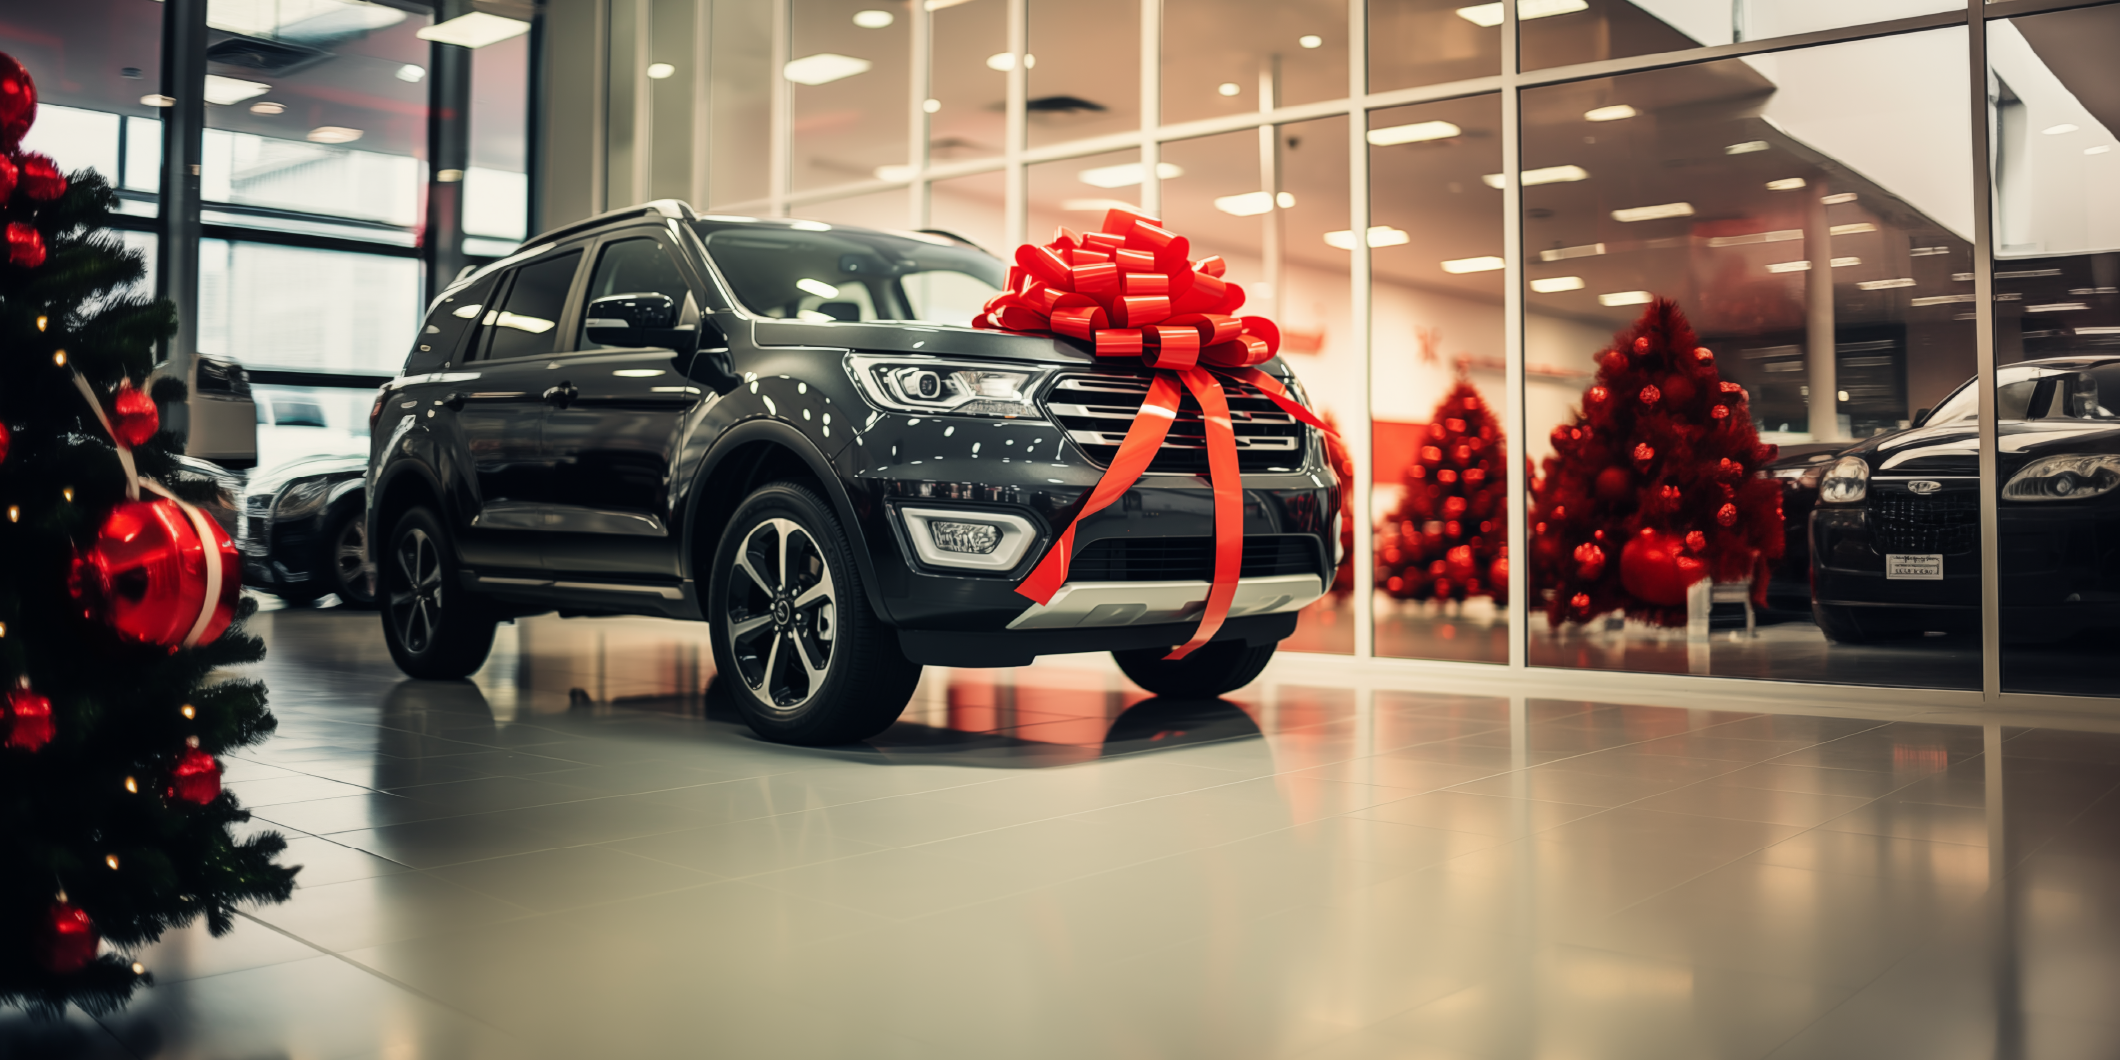 Gift or Fantasy? Holiday Car Giving Unwrapped